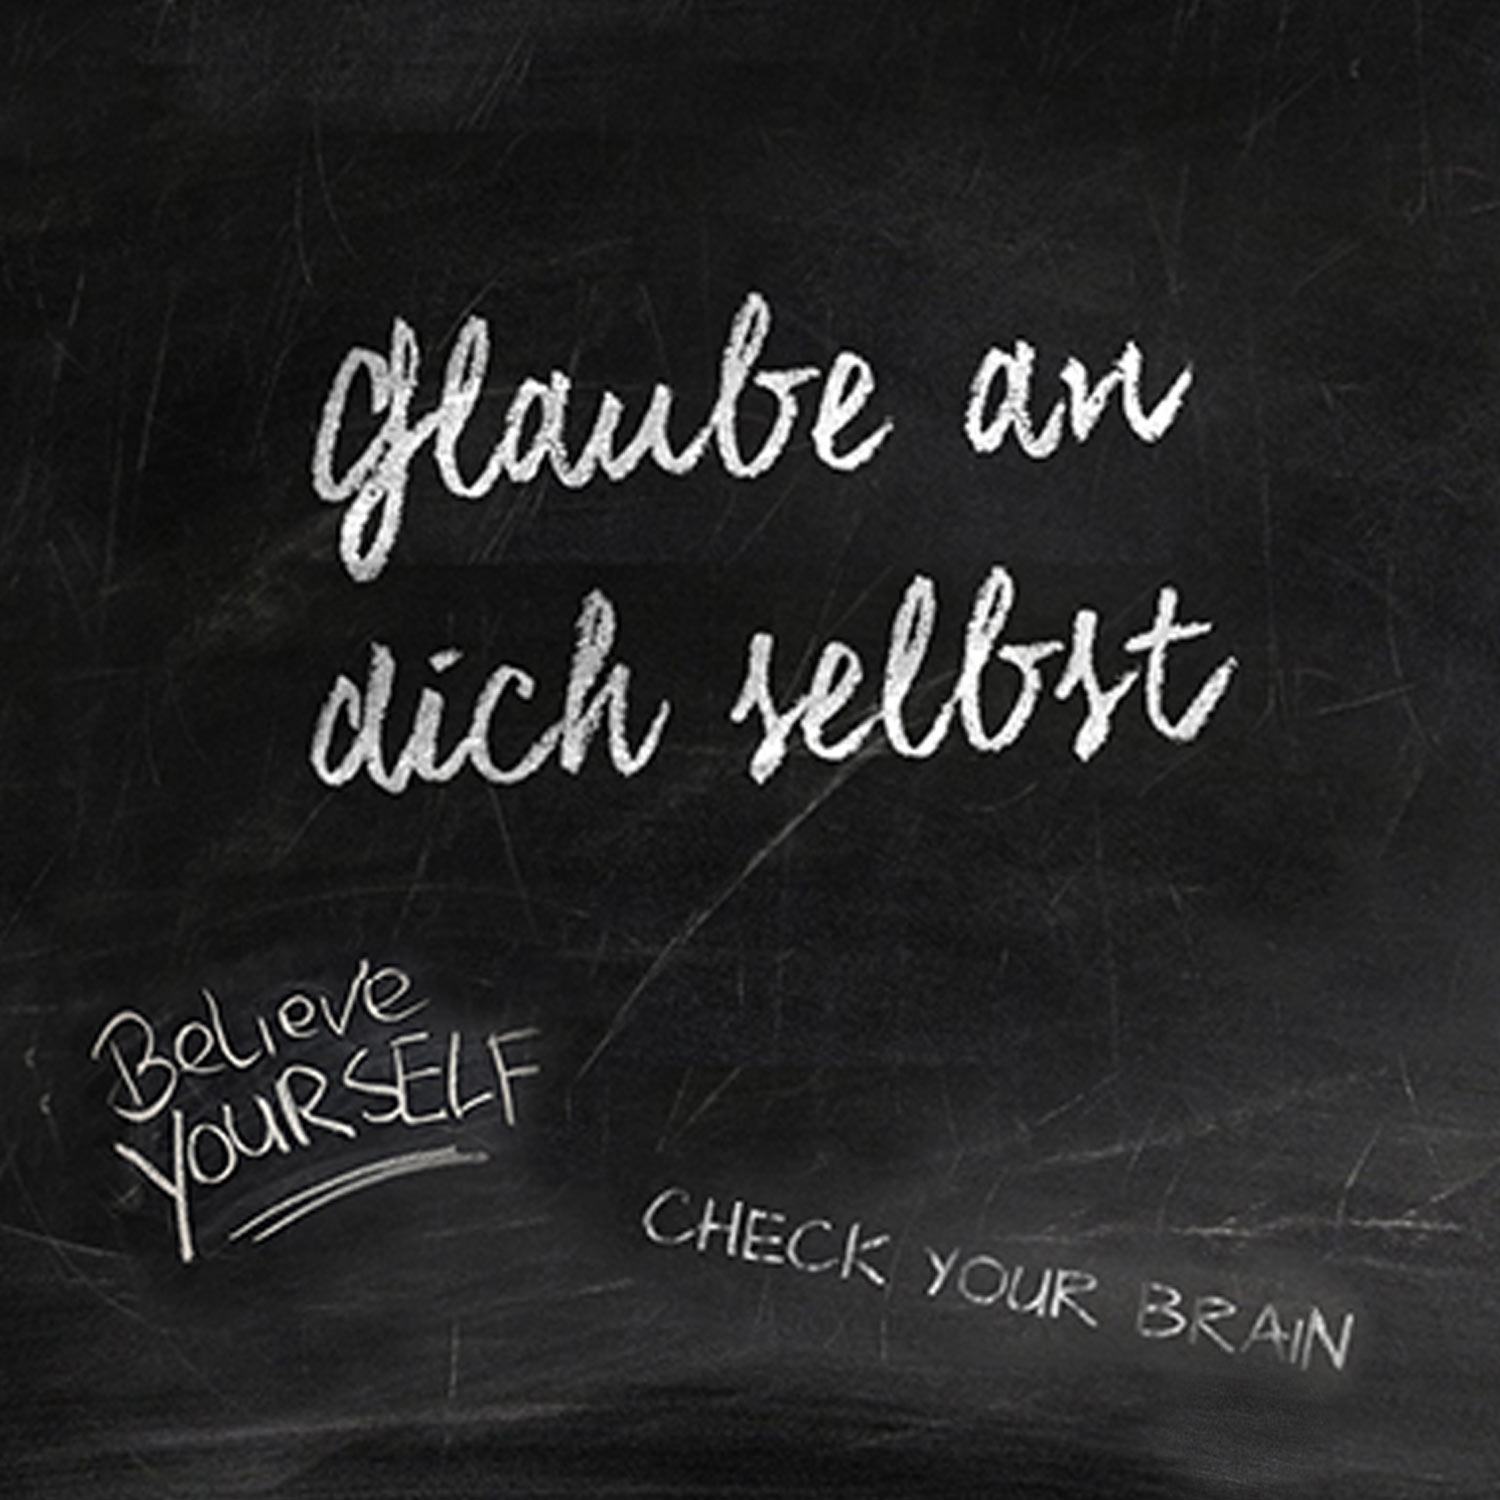 glaube-an-dich-selbst-toao